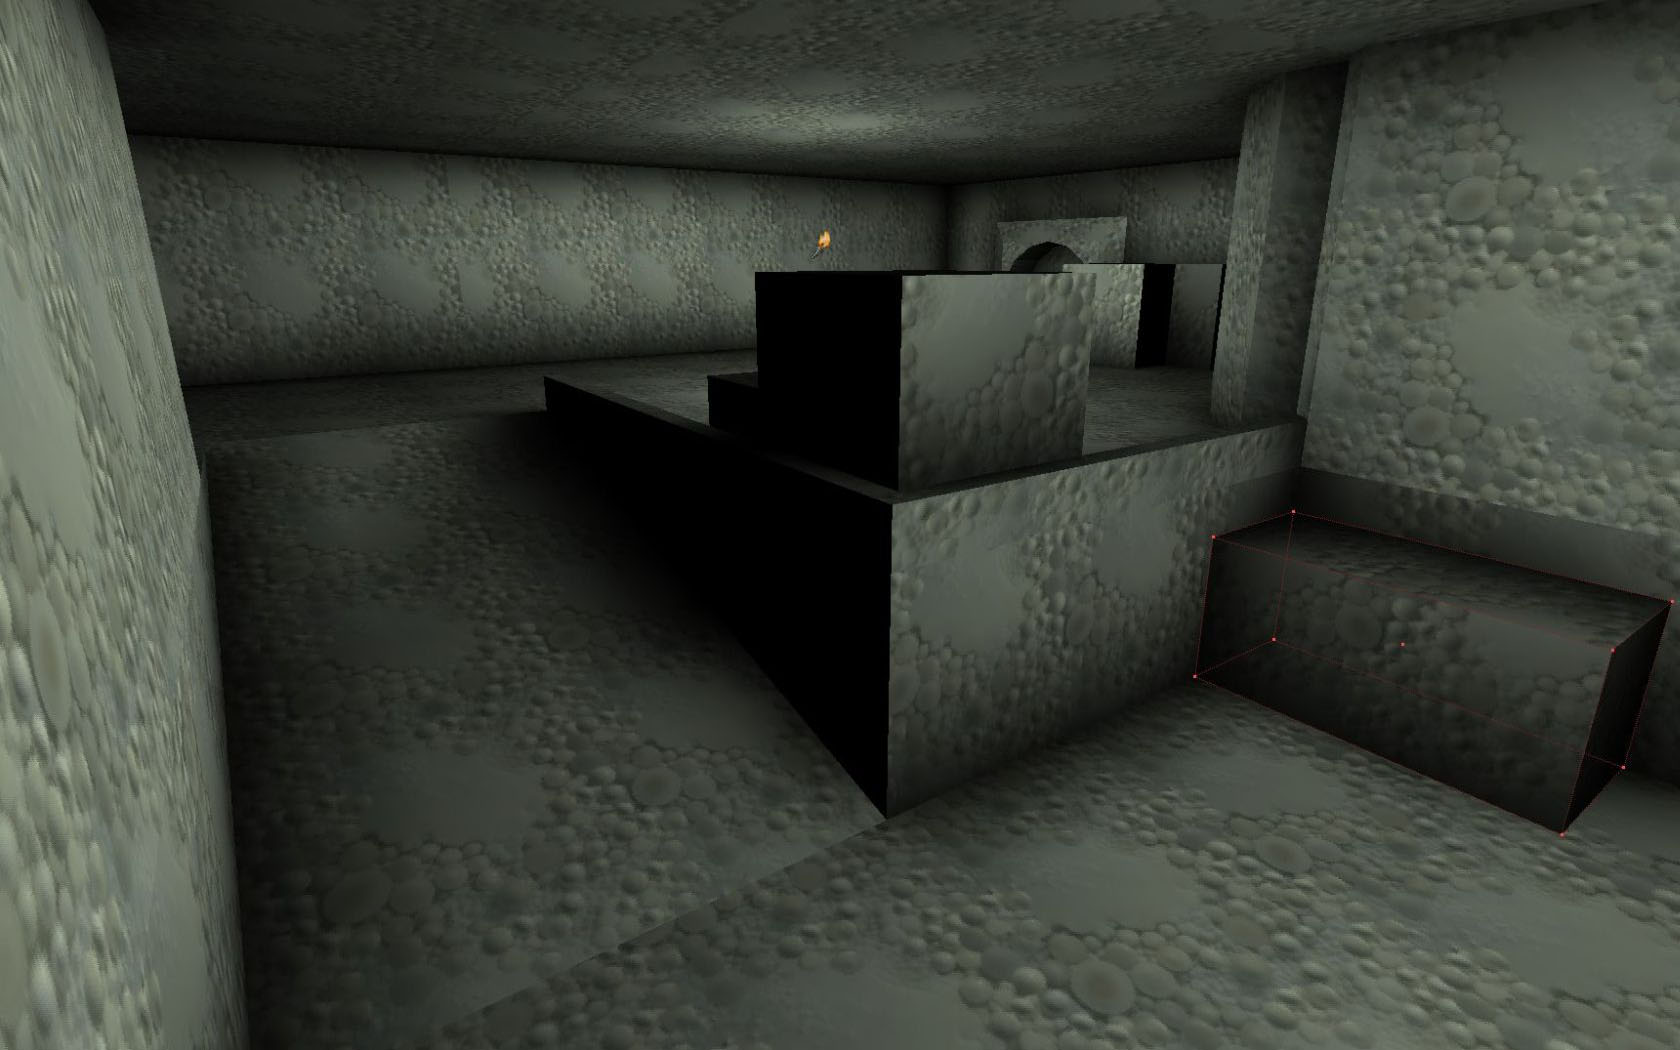 This is a view of GG-de_dust2. A work in progress.